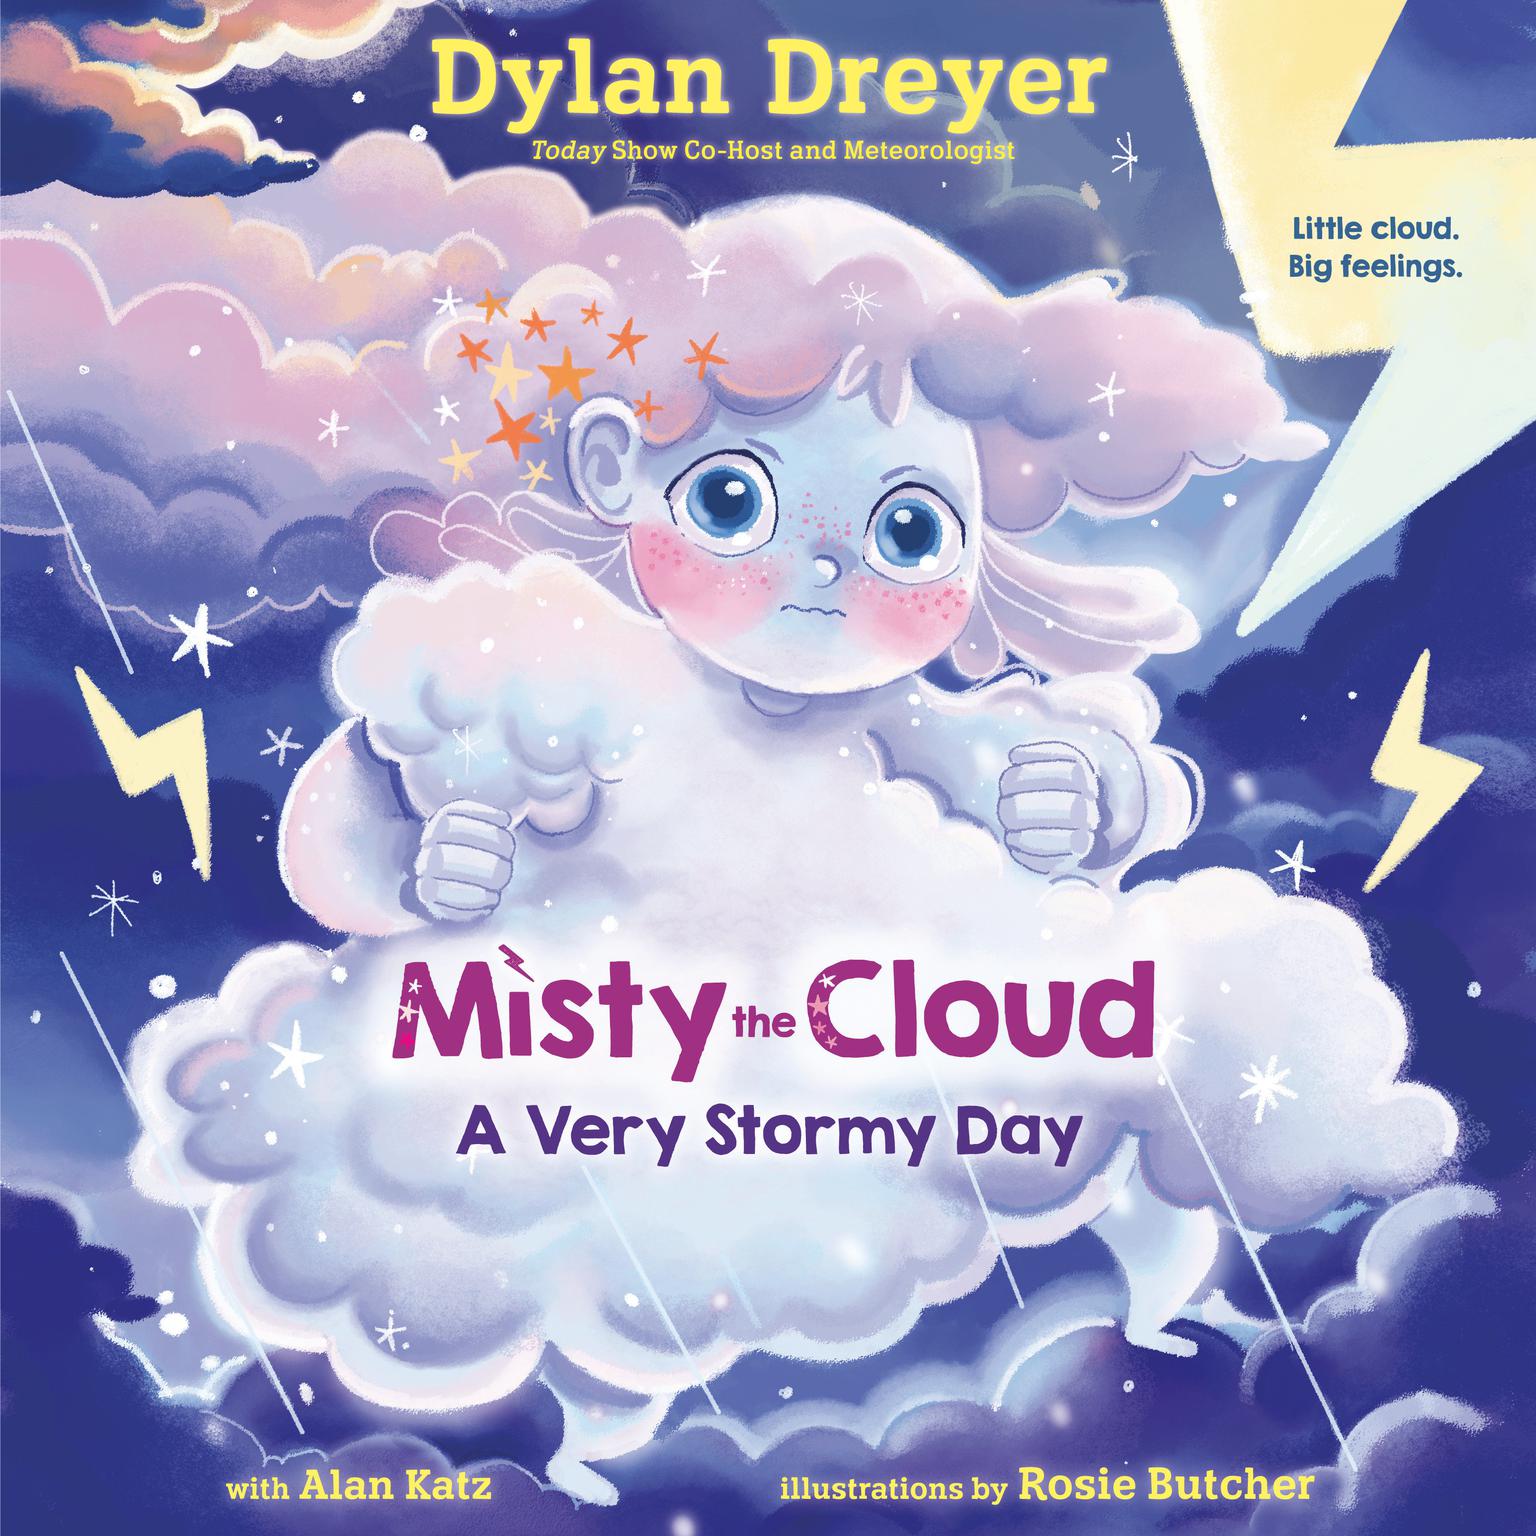 Misty the Cloud: A Very Stormy Day Audiobook, by Dylan Dreyer